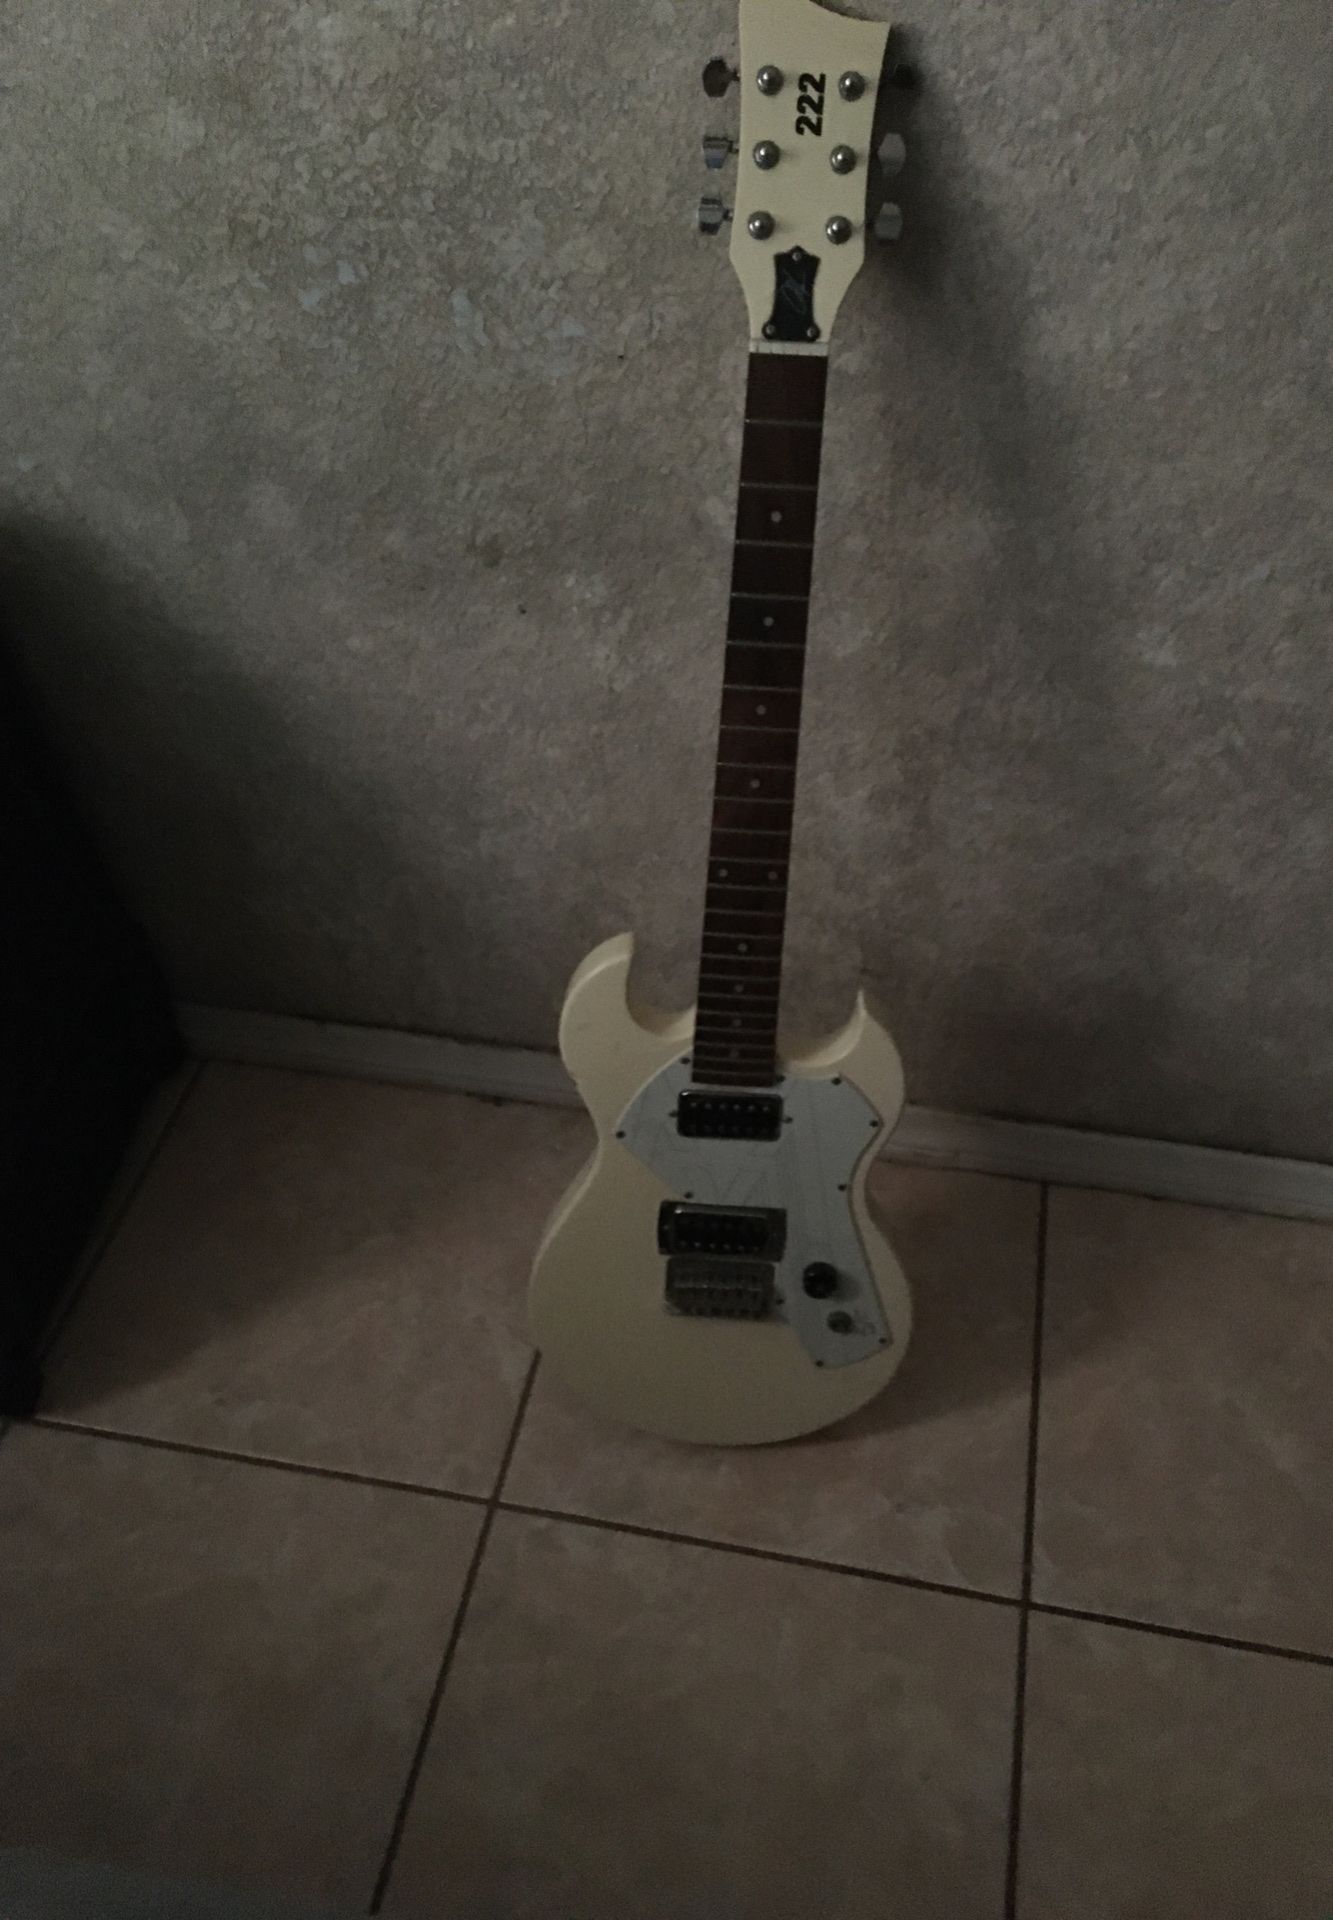 222 Electric guitar with no strings